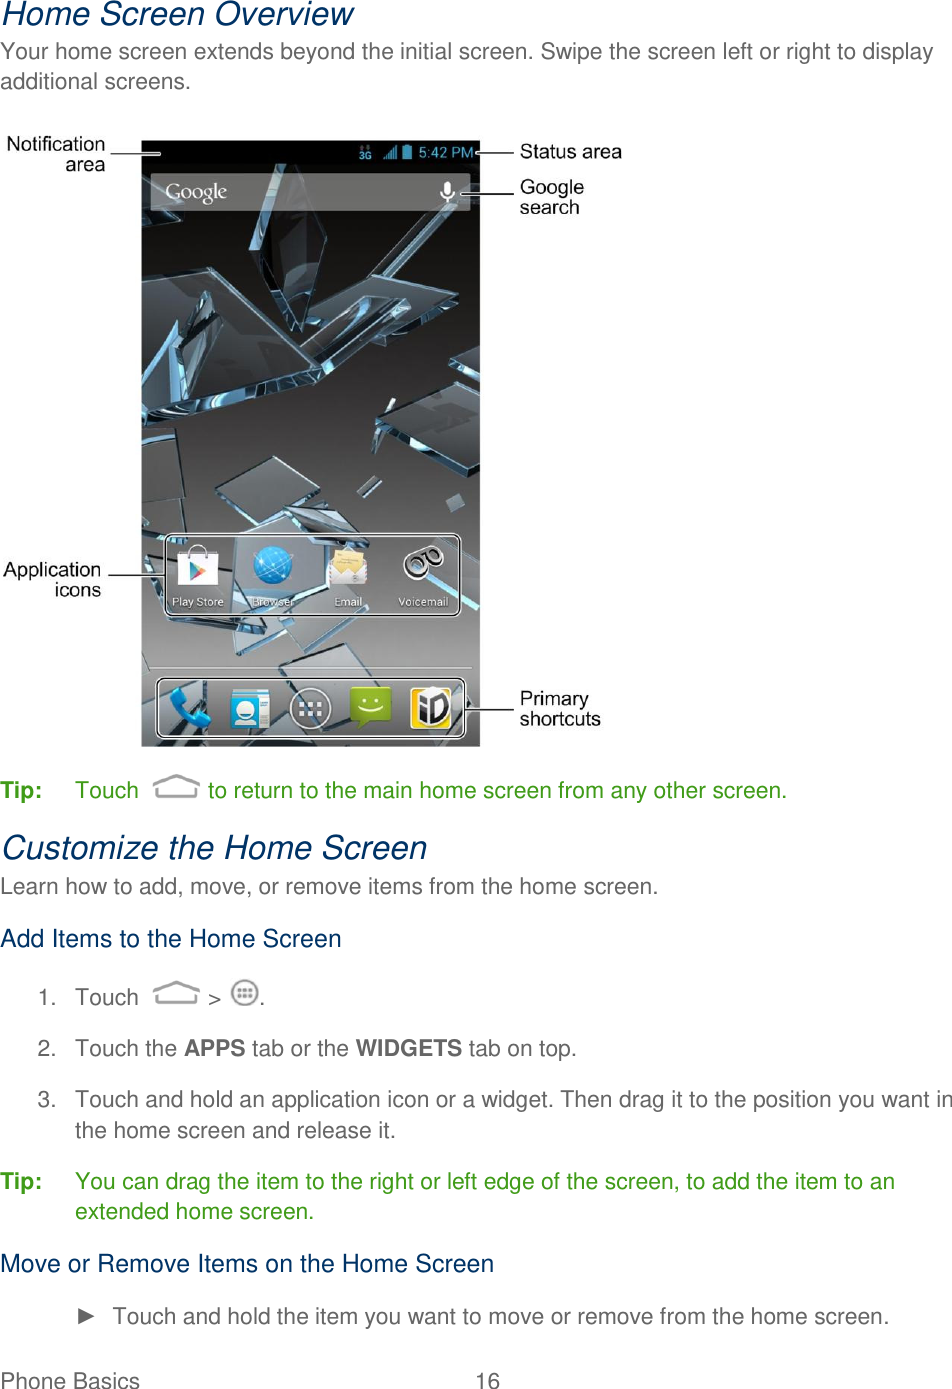 Phone Basics  16   Home Screen Overview Your home screen extends beyond the initial screen. Swipe the screen left or right to display additional screens.   Tip:  Touch   to return to the main home screen from any other screen.  Customize the Home Screen Learn how to add, move, or remove items from the home screen. Add Items to the Home Screen 1.  Touch   &gt;  . 2.  Touch the APPS tab or the WIDGETS tab on top. 3.  Touch and hold an application icon or a widget. Then drag it to the position you want in the home screen and release it. Tip:  You can drag the item to the right or left edge of the screen, to add the item to an extended home screen. Move or Remove Items on the Home Screen ►  Touch and hold the item you want to move or remove from the home screen. 